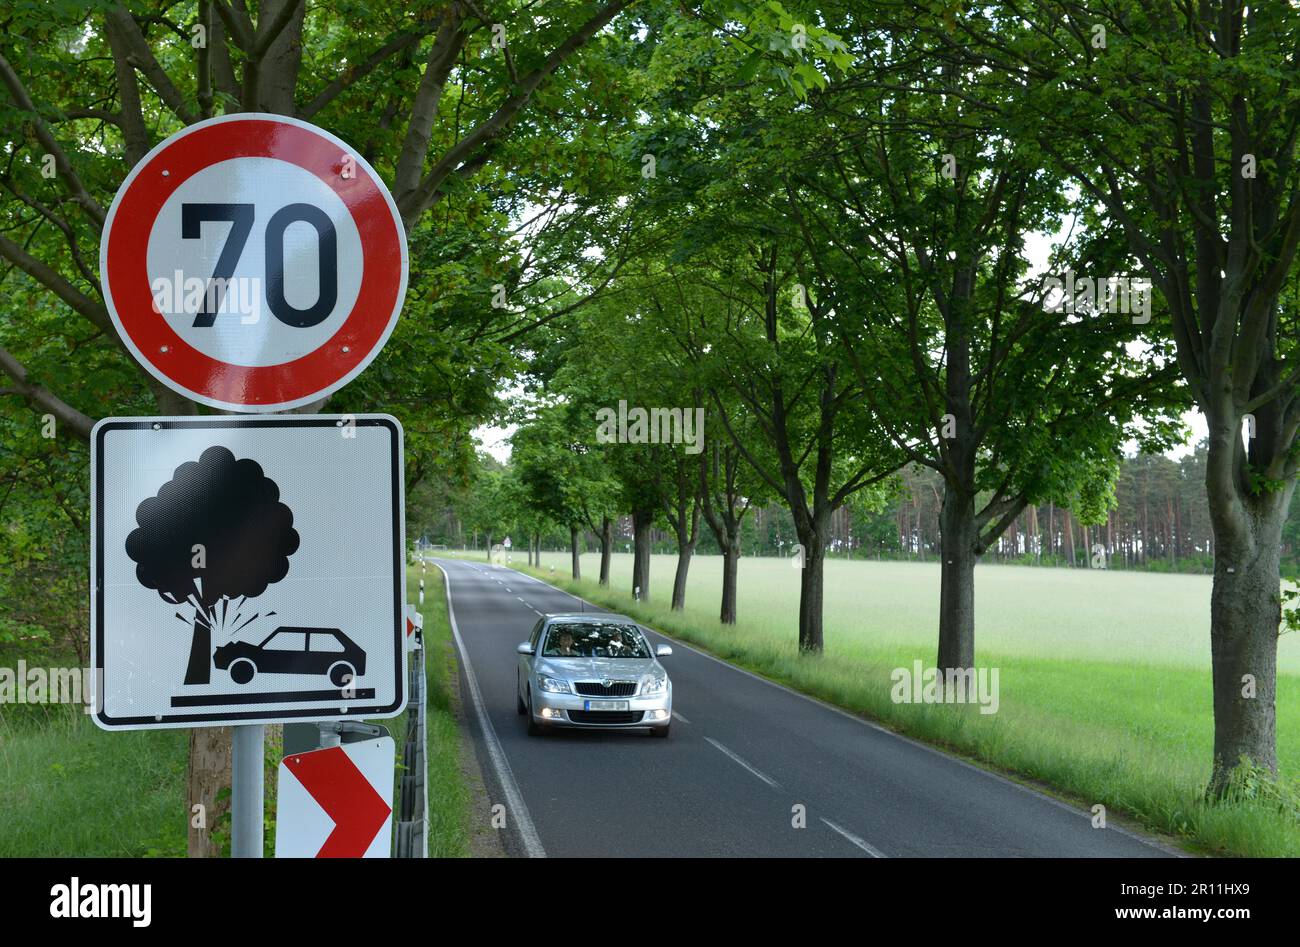 Tree-lined avenue, country road, L88, Brandenburg, Germany Stock Photo